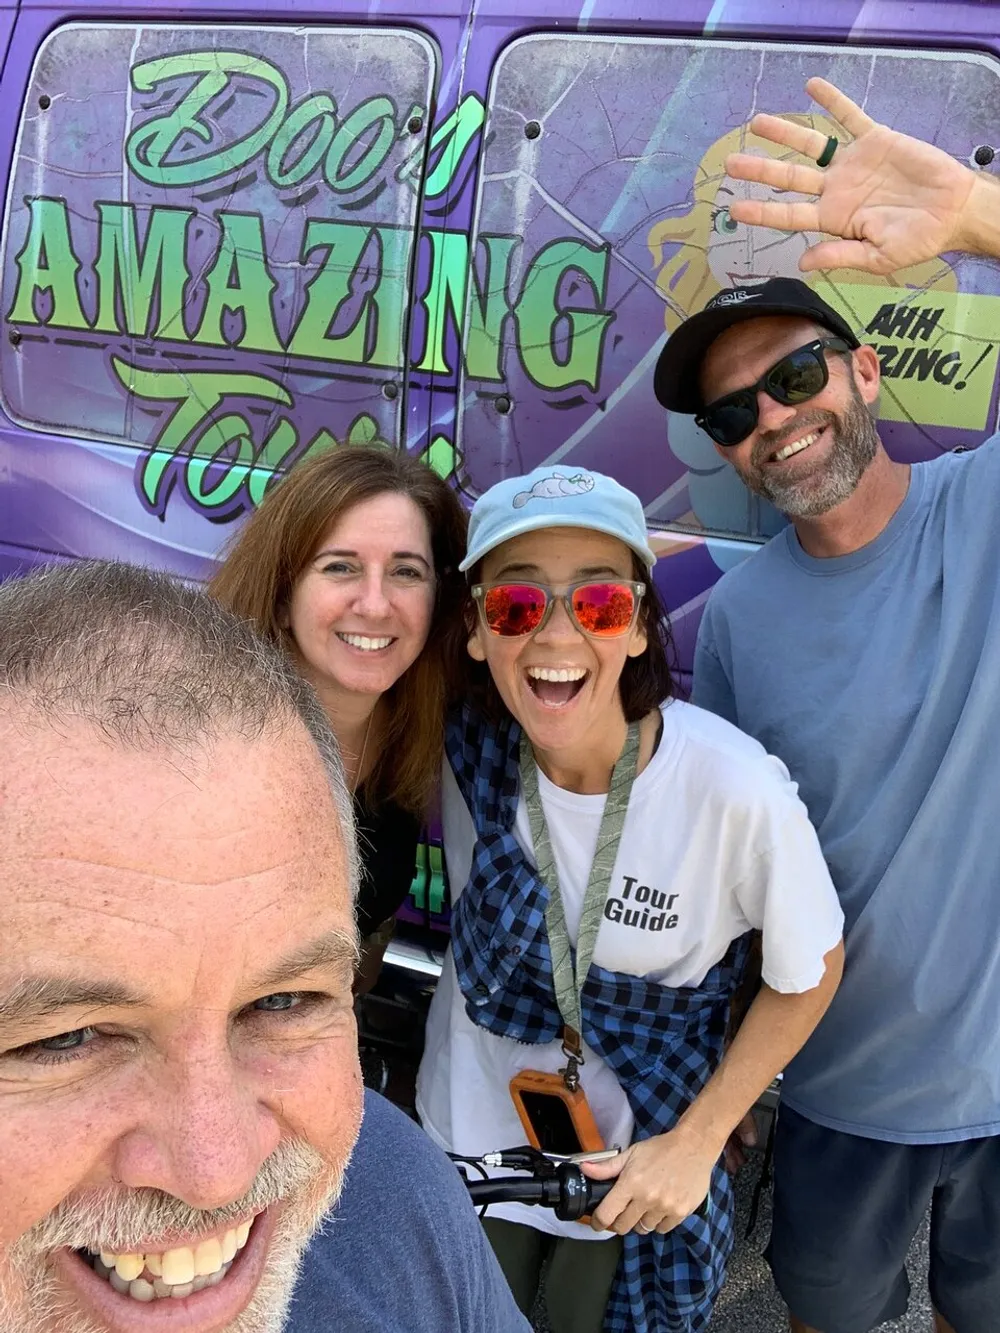 A group of four people is taking a joyful selfie with a smiling man in the foreground and a colorful van with the text DOOM AMAZING in the background